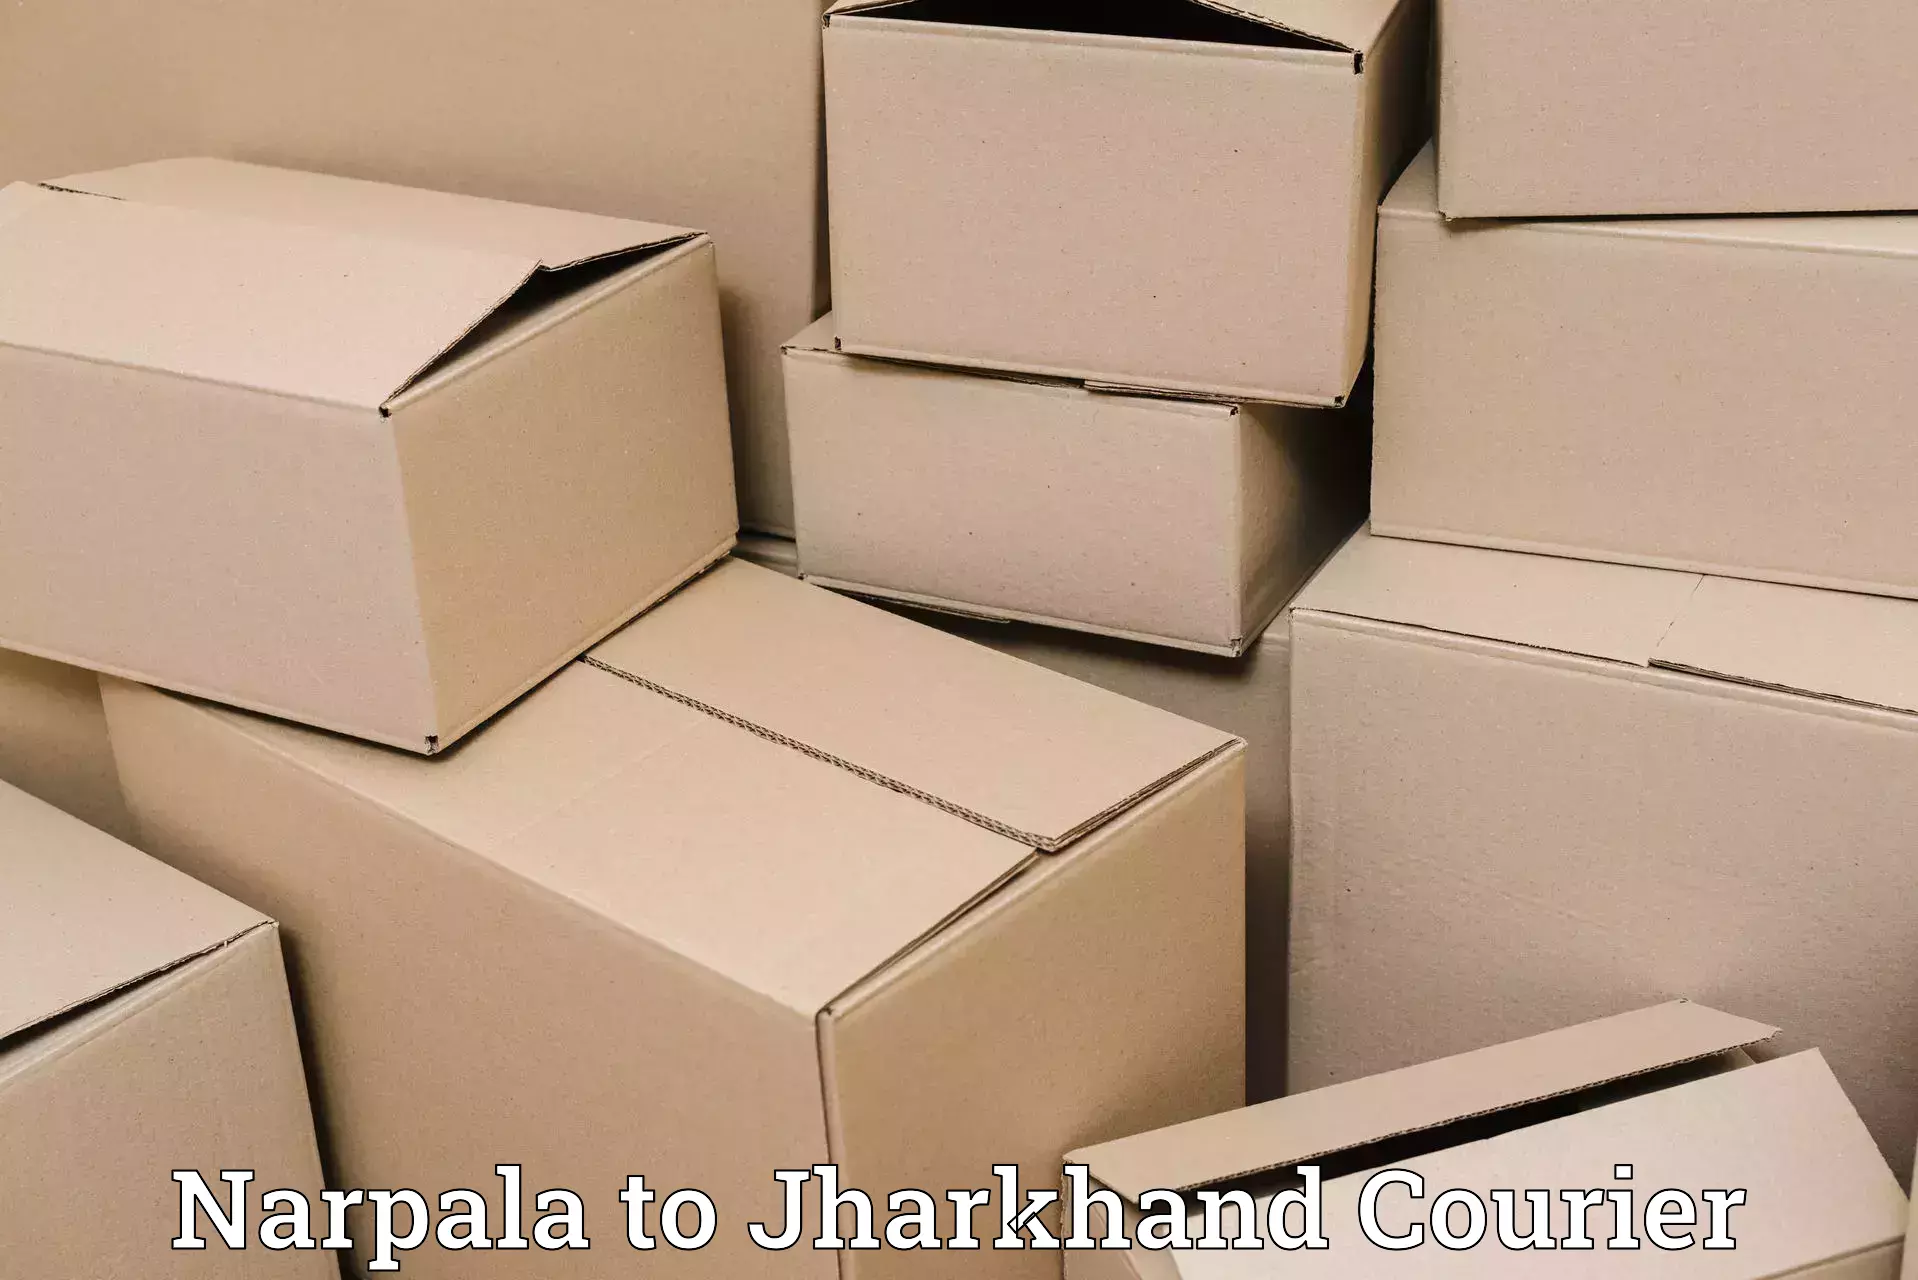 Courier service booking Narpala to Rangalia